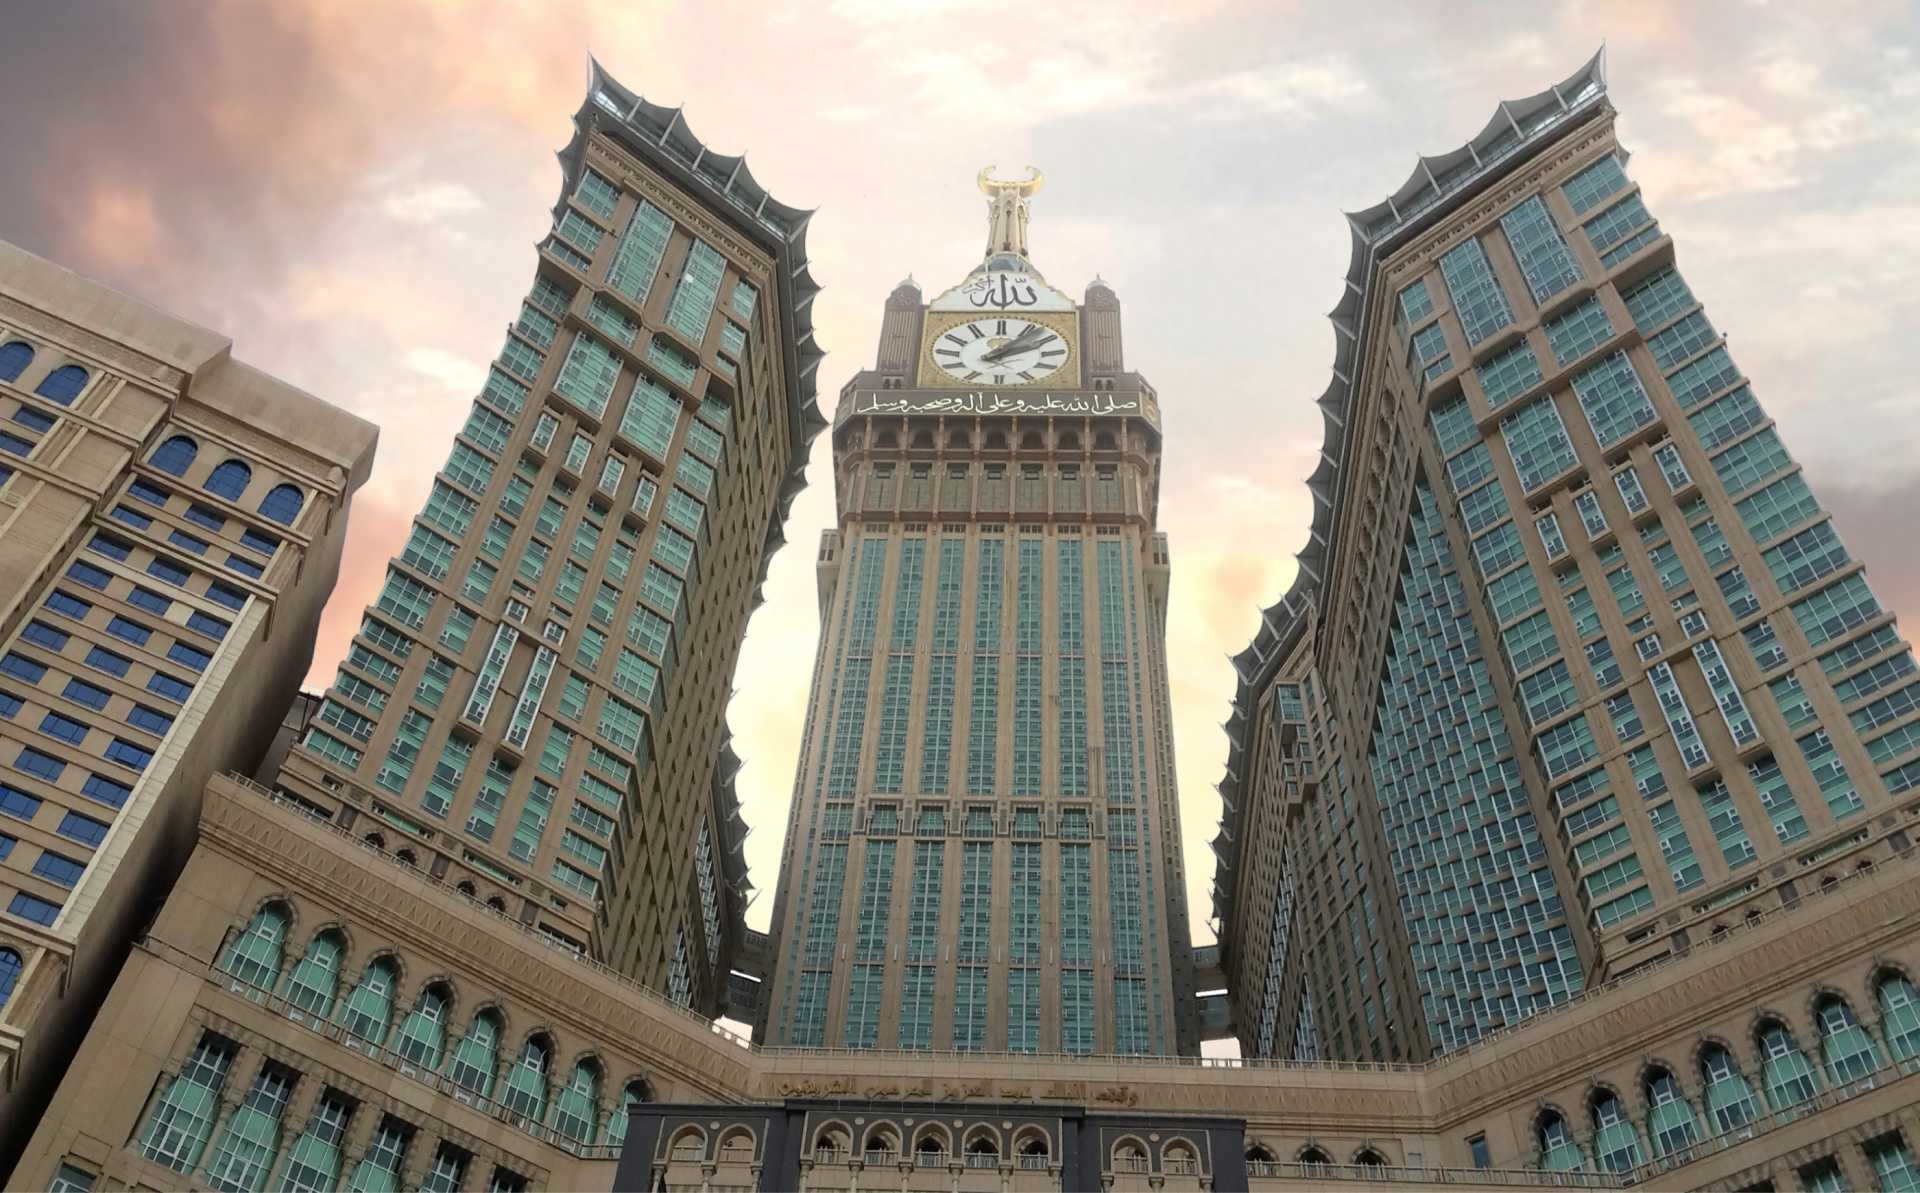 Abraj Al Bait is one of the biggest hotel in the world